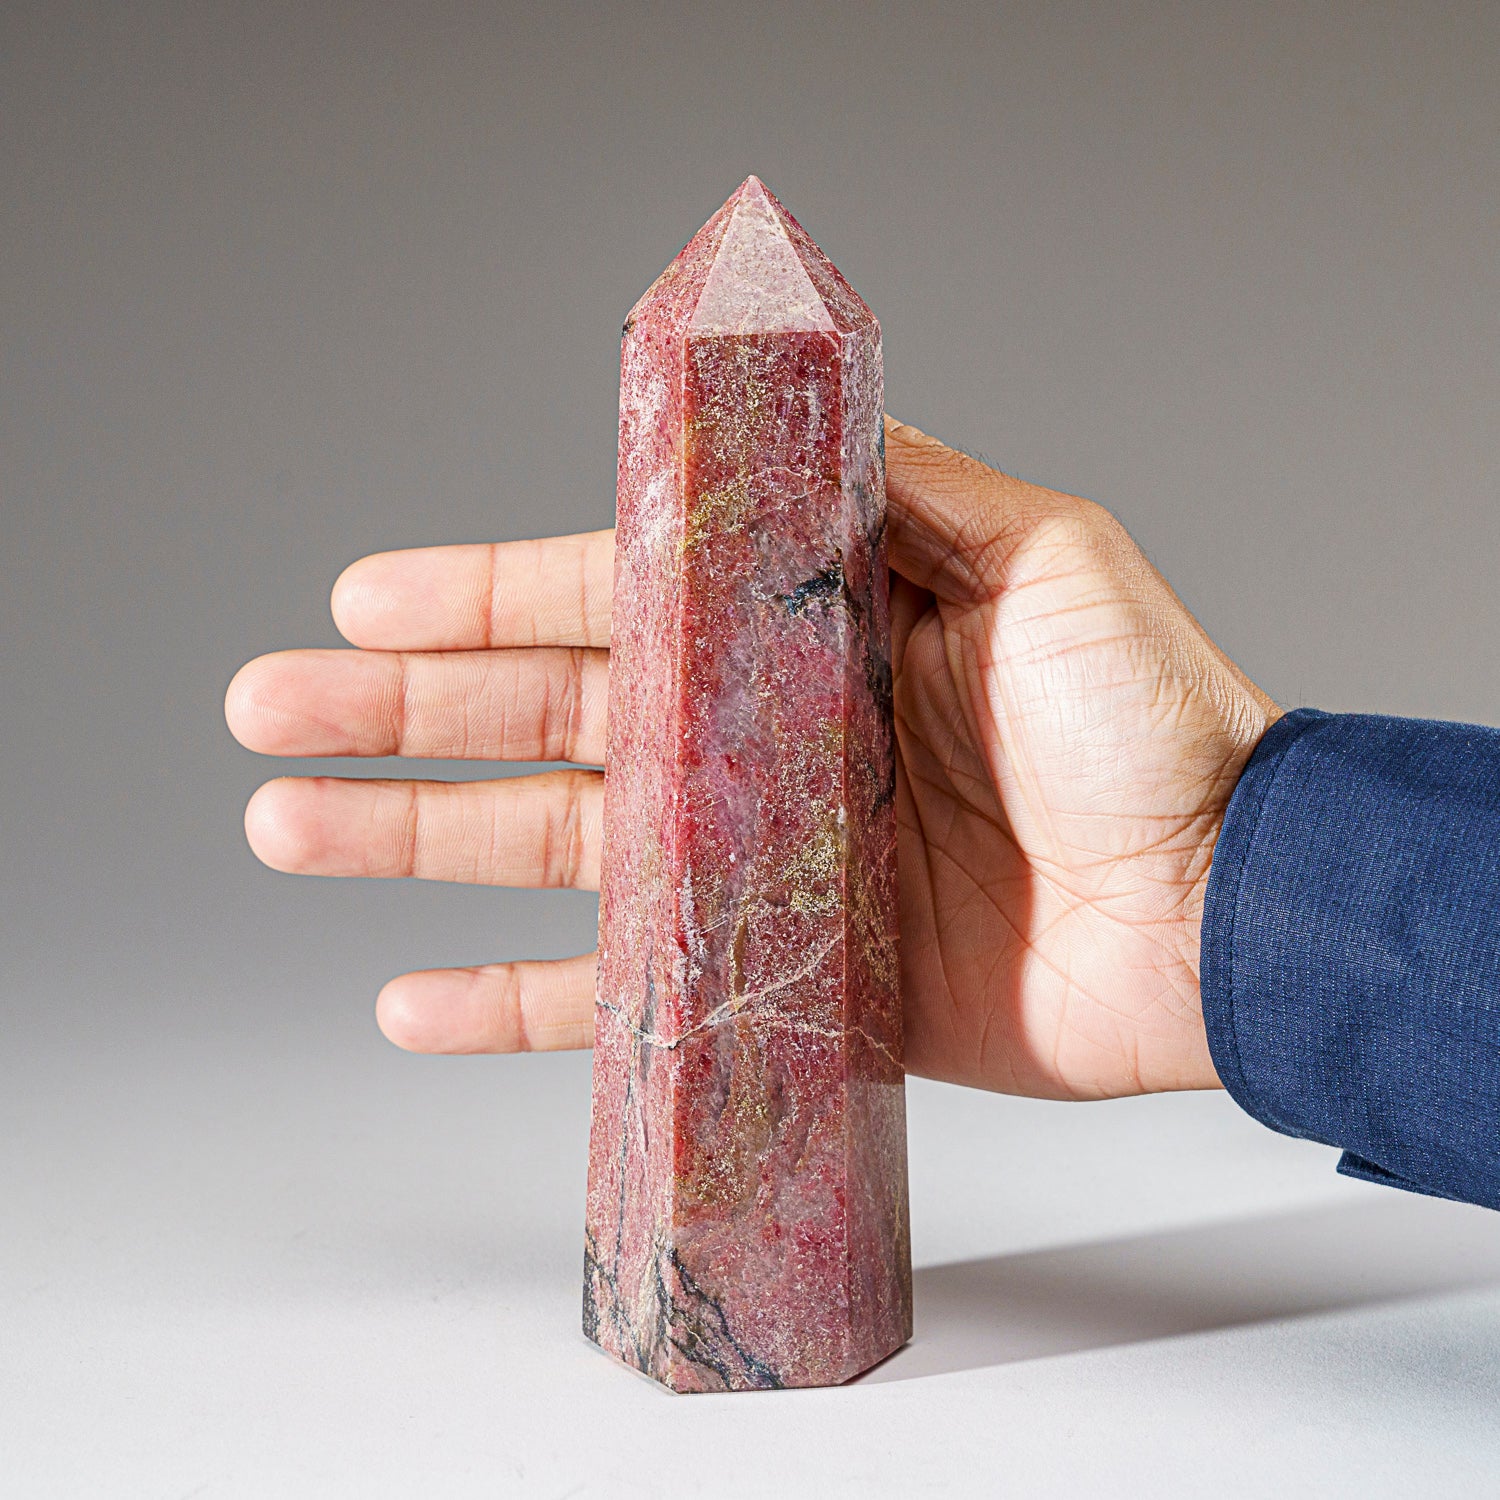 Genuine Polished Imperial Rhodonite Point (2.1 lbs)